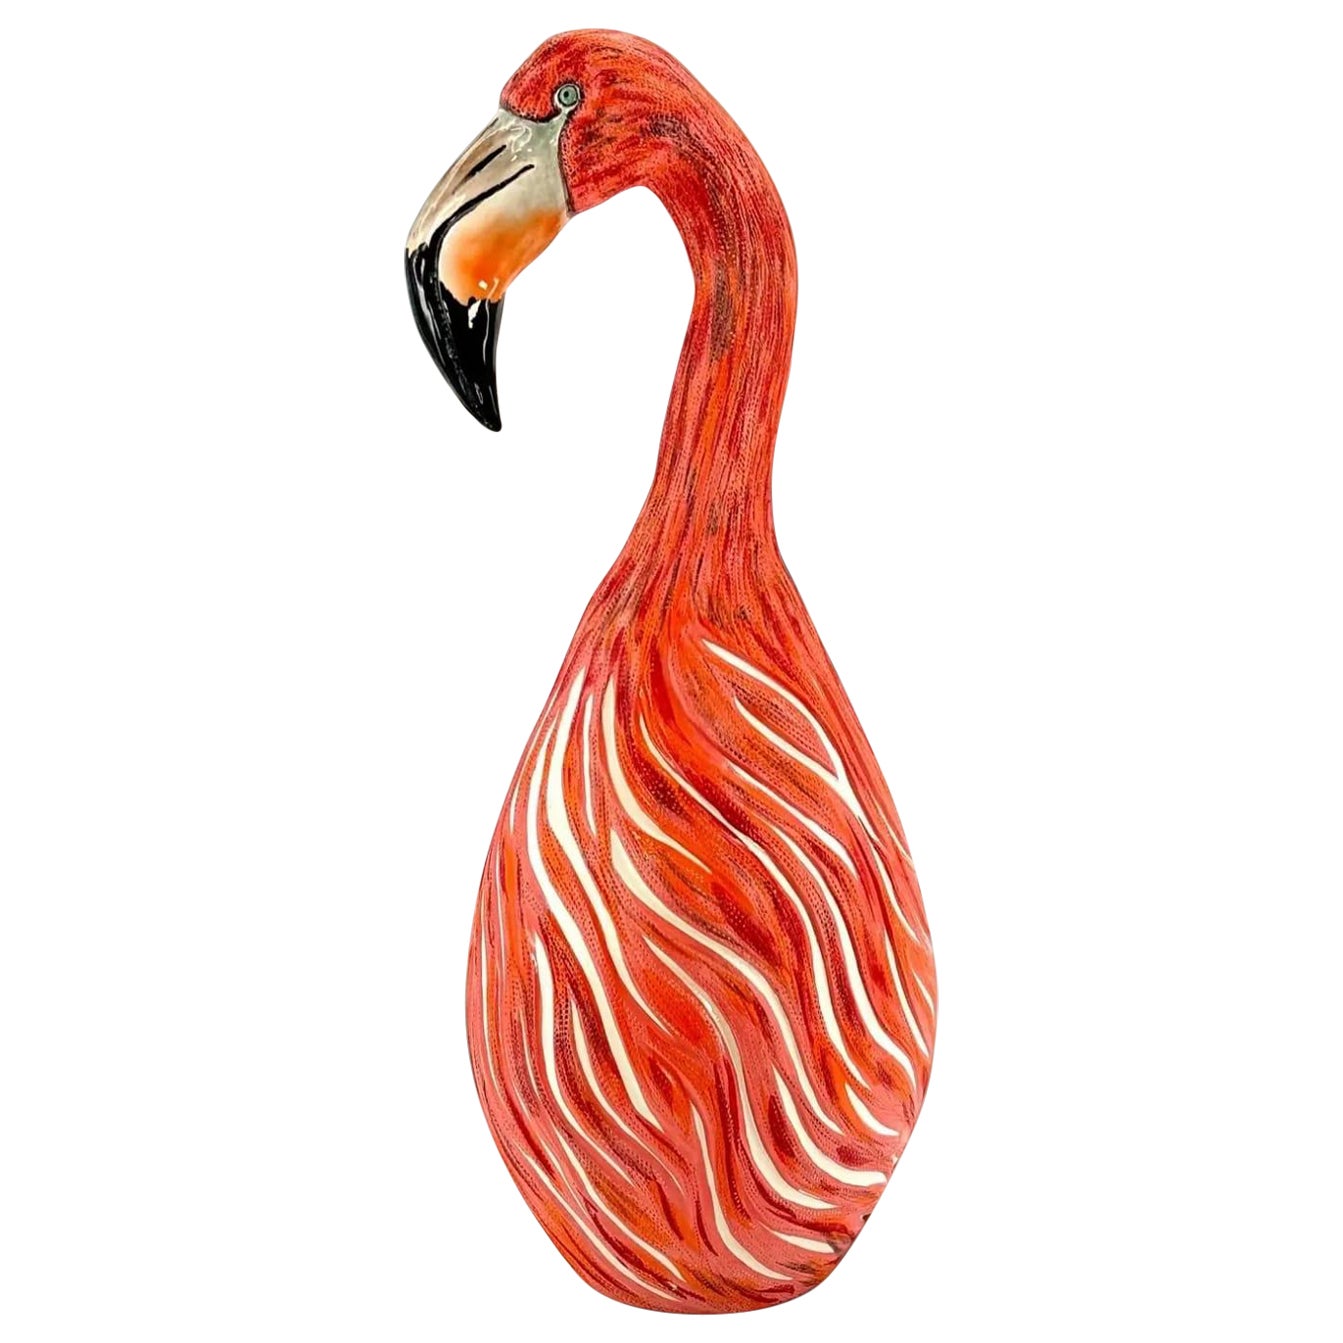 Pink Flamingo Ceramic Sculpture Centerpiece, Handmade Without Mold, new 2023 For Sale